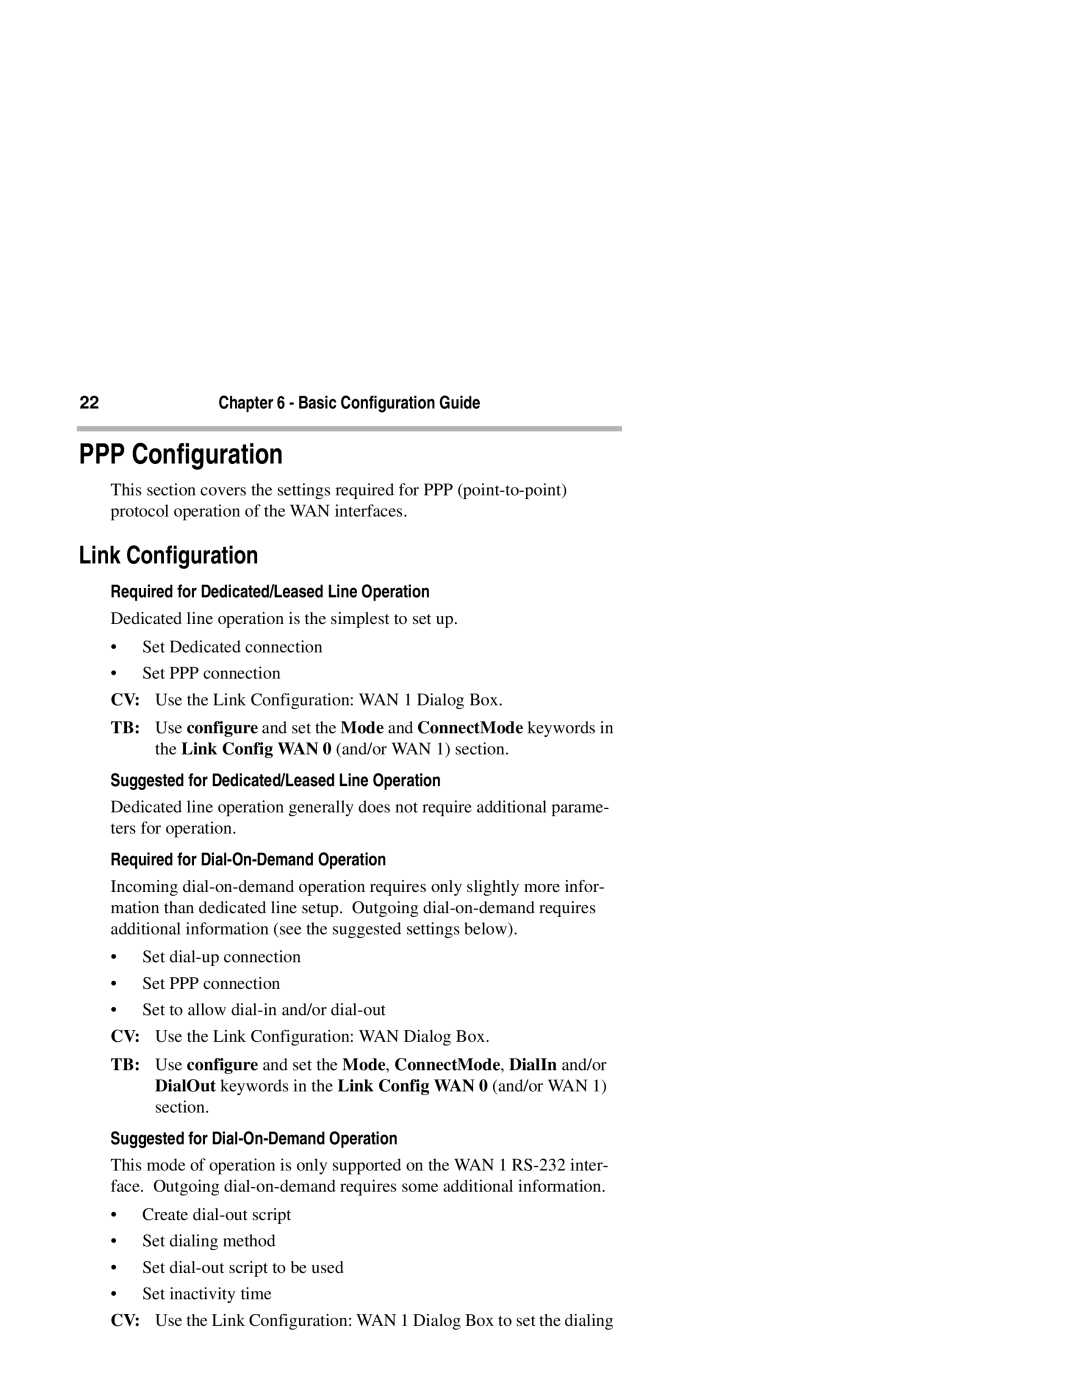 Compatible Systems 1220I manual Link Configuration, Required for Dedicated/Leased Line Operation 